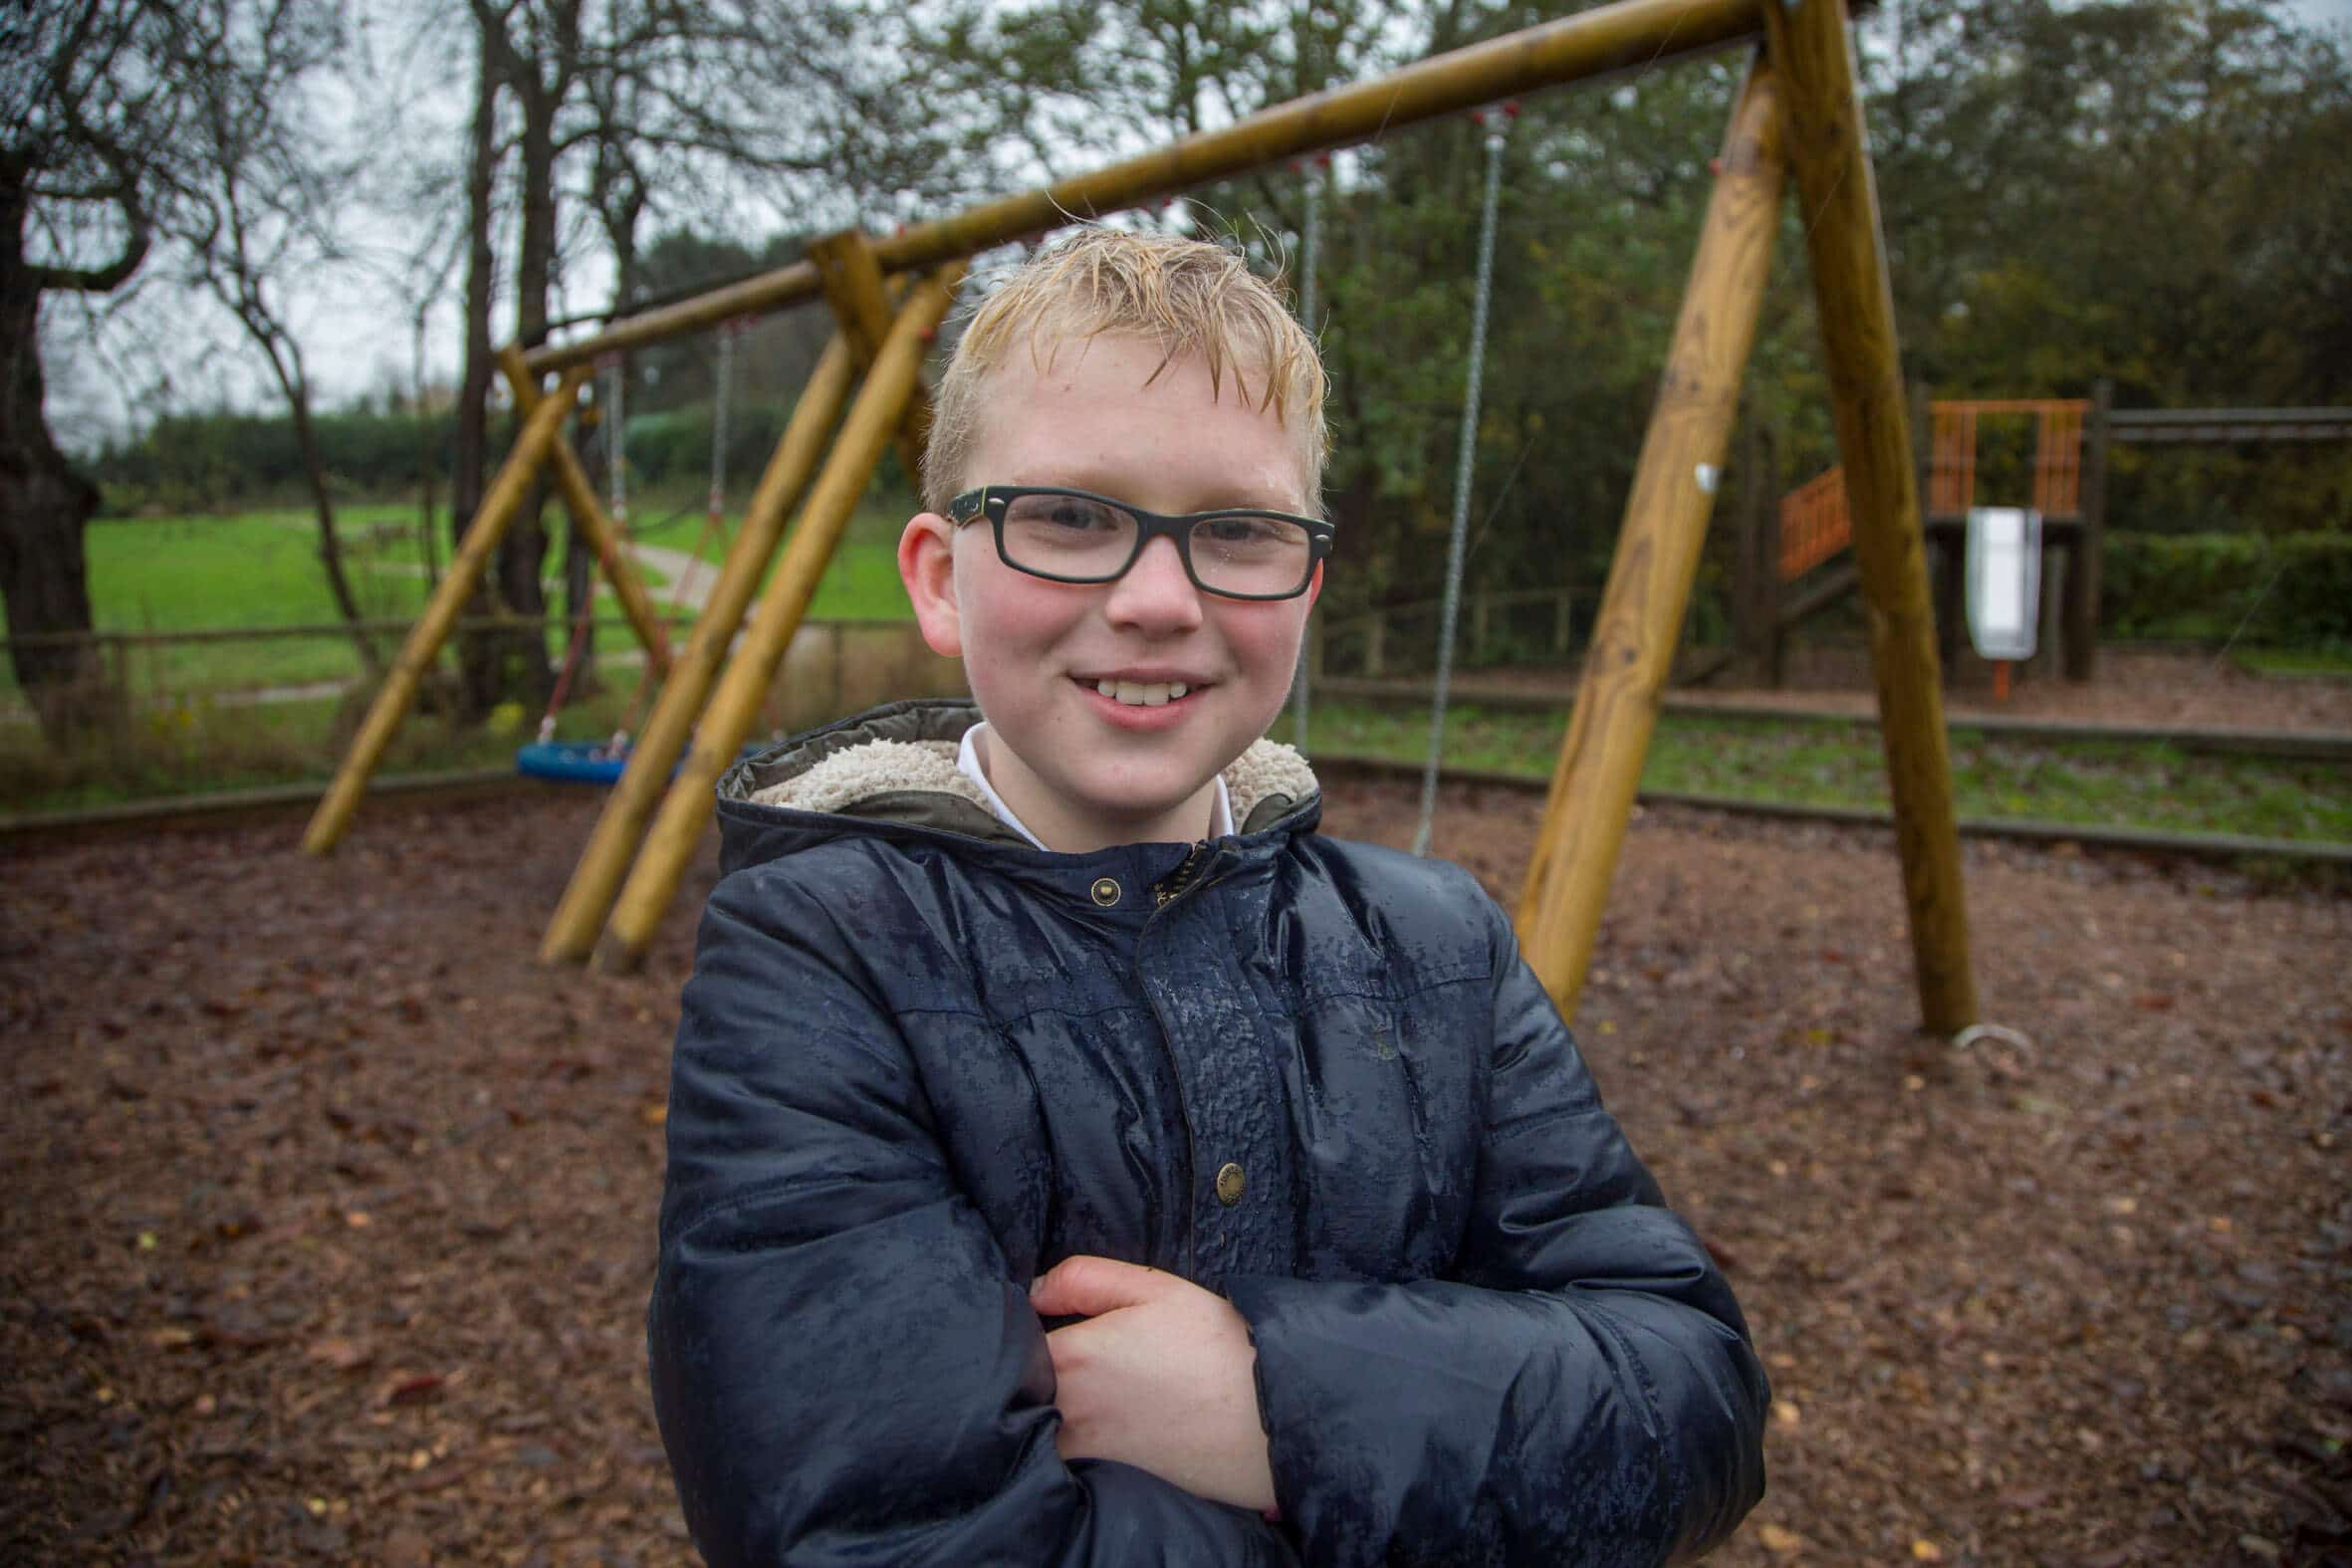 Creative Play..... Jack Roberts, 10 Who Officially Opened The New Playground In Llanferres